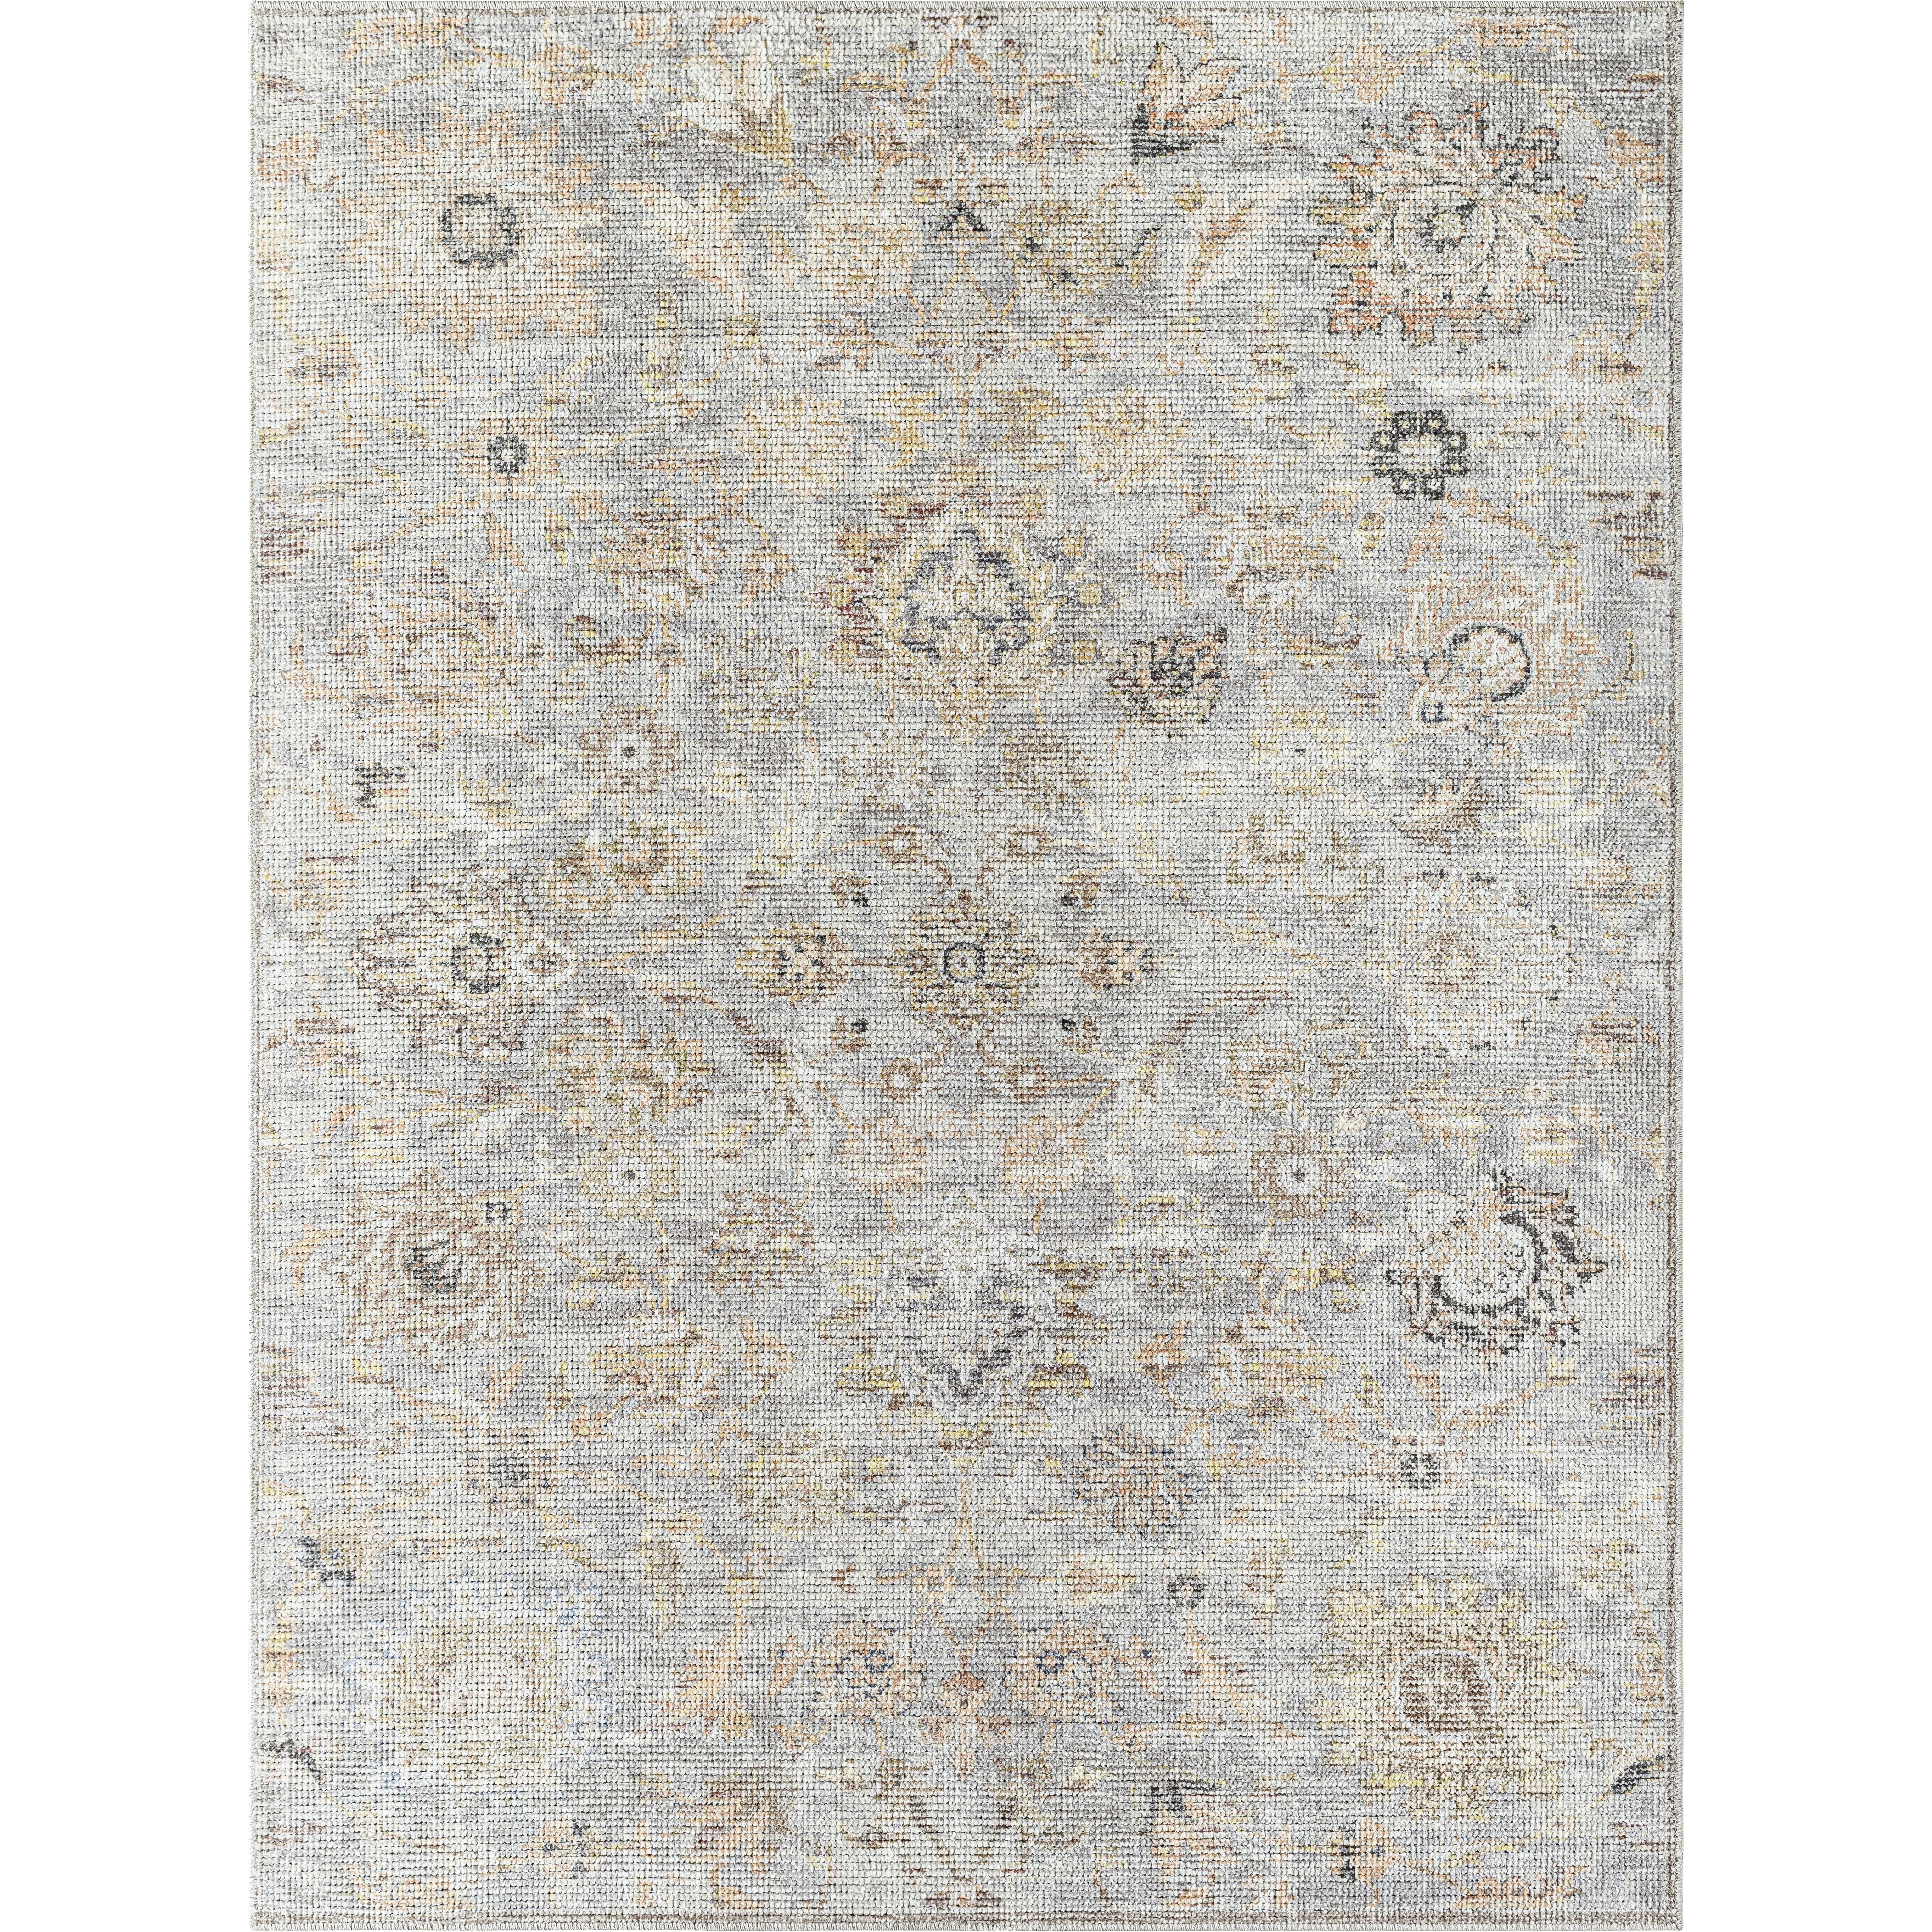 PNW Home x Surya available at Amethyst Home shipping to Australia, UK, and Canada. Organic modern design with easy to clean rugs for a family home in  the San Diego metro area.